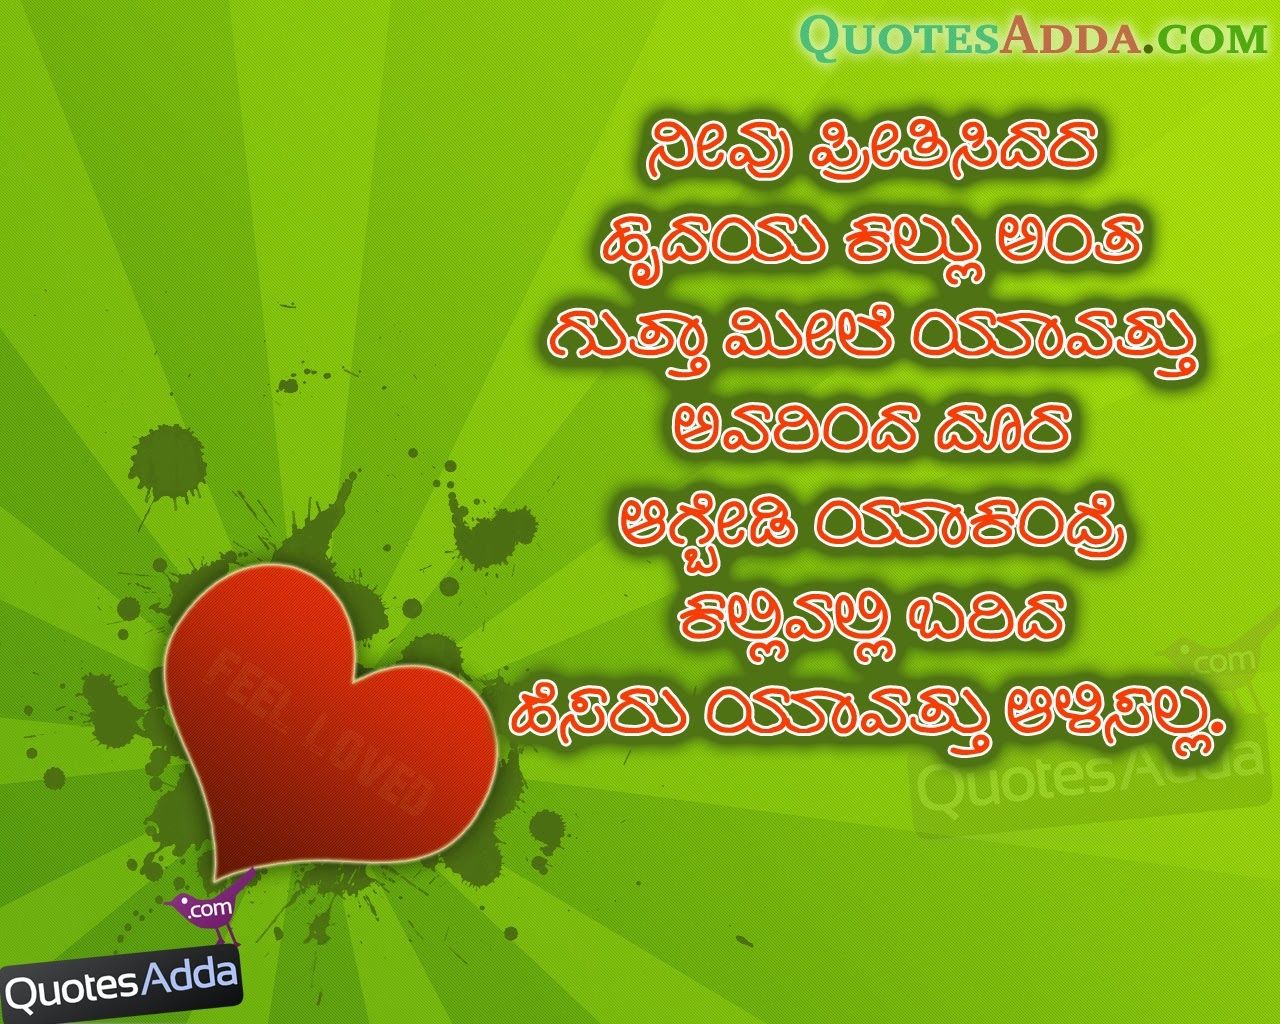 Good Night Thoughts In Kannada - 1280x1024 Wallpaper 